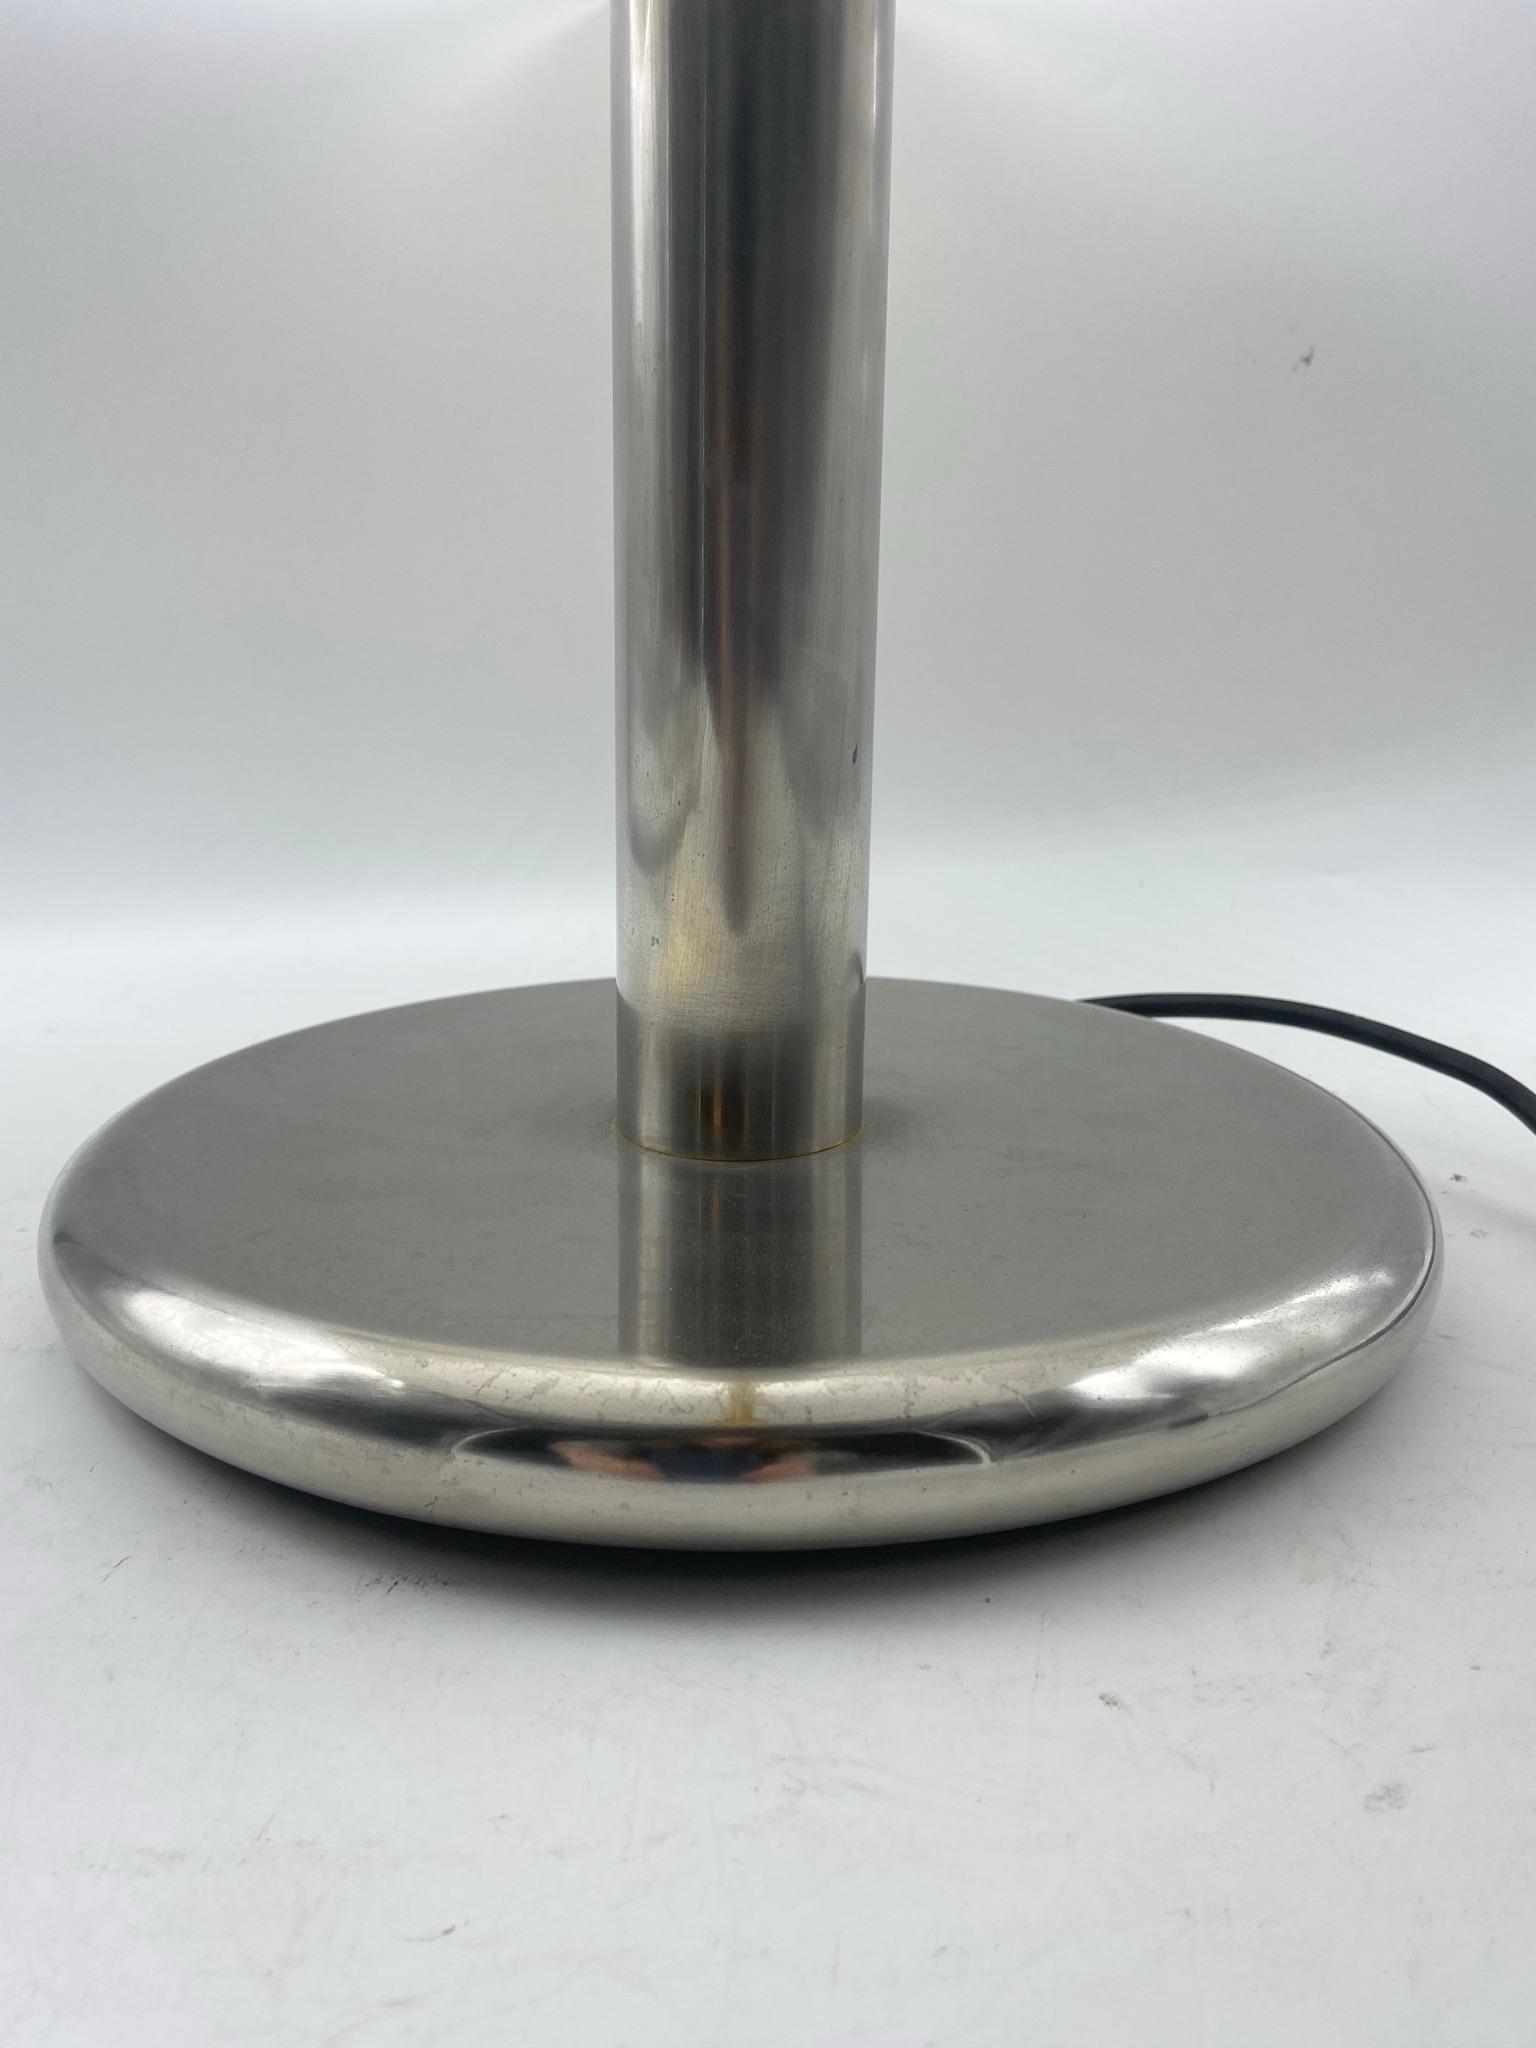 VeArt, Murano, large 1970s chrome table lamp with a heavy weight glass shade.